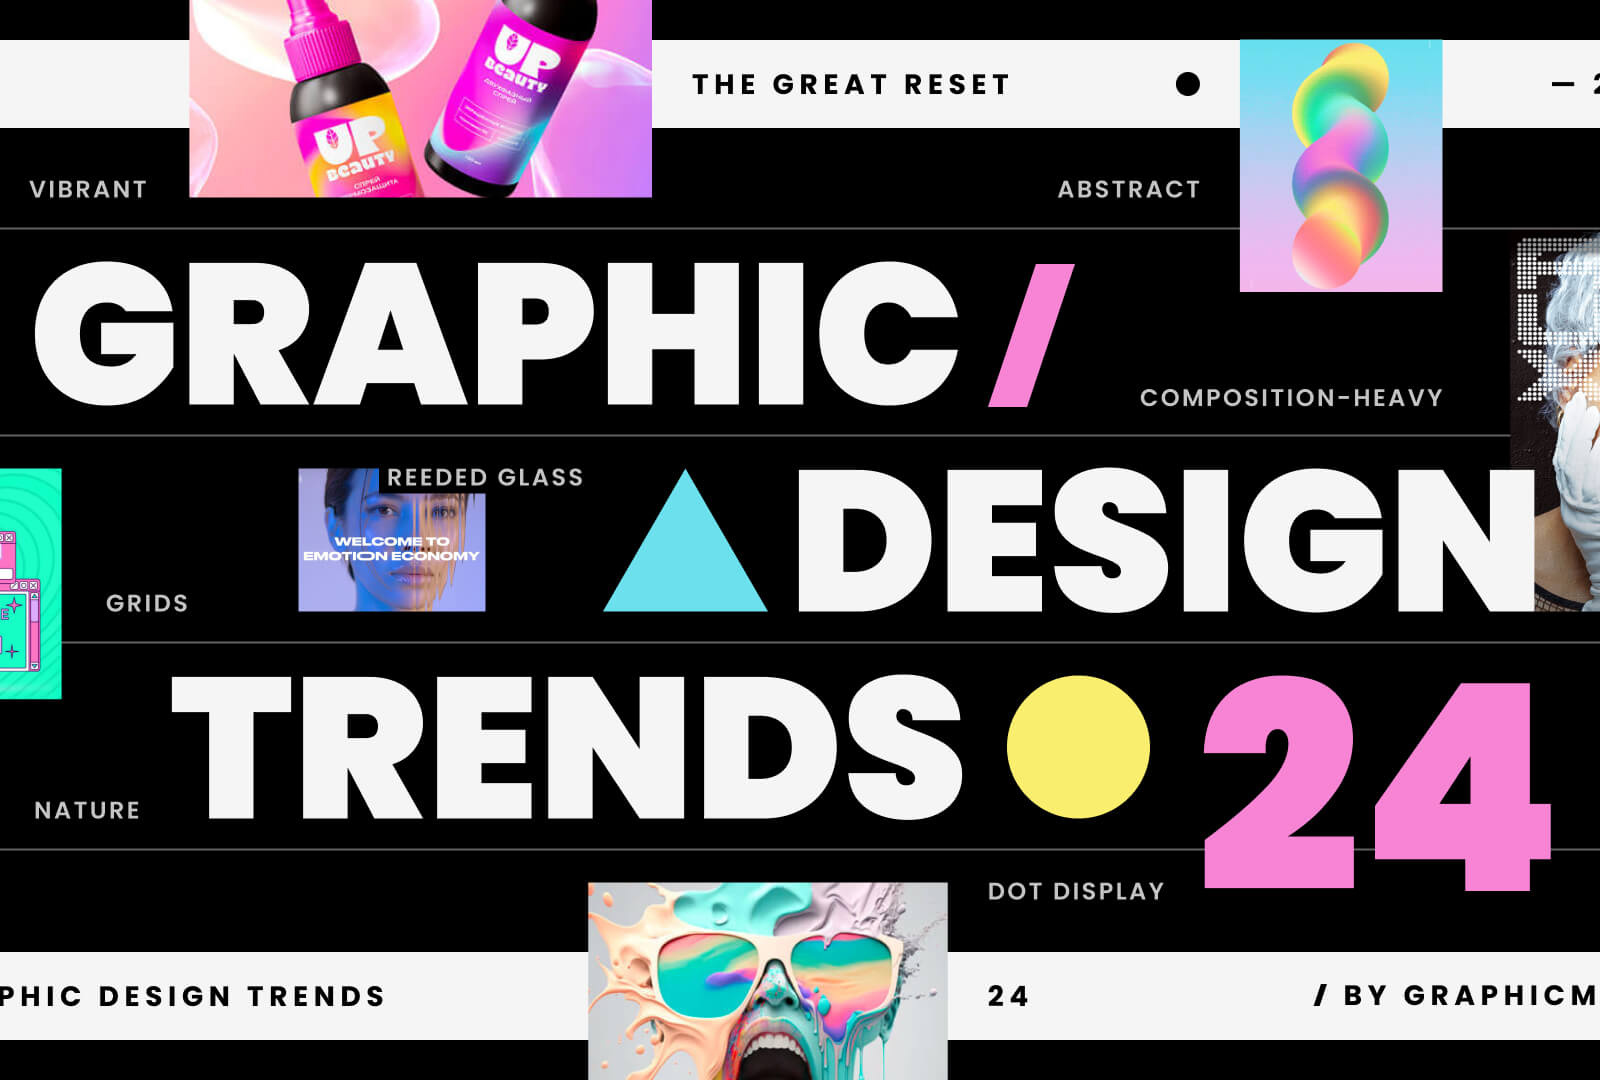 Graphic Design Trends 2024 The Great Reset by GraphicMama on Dribbble